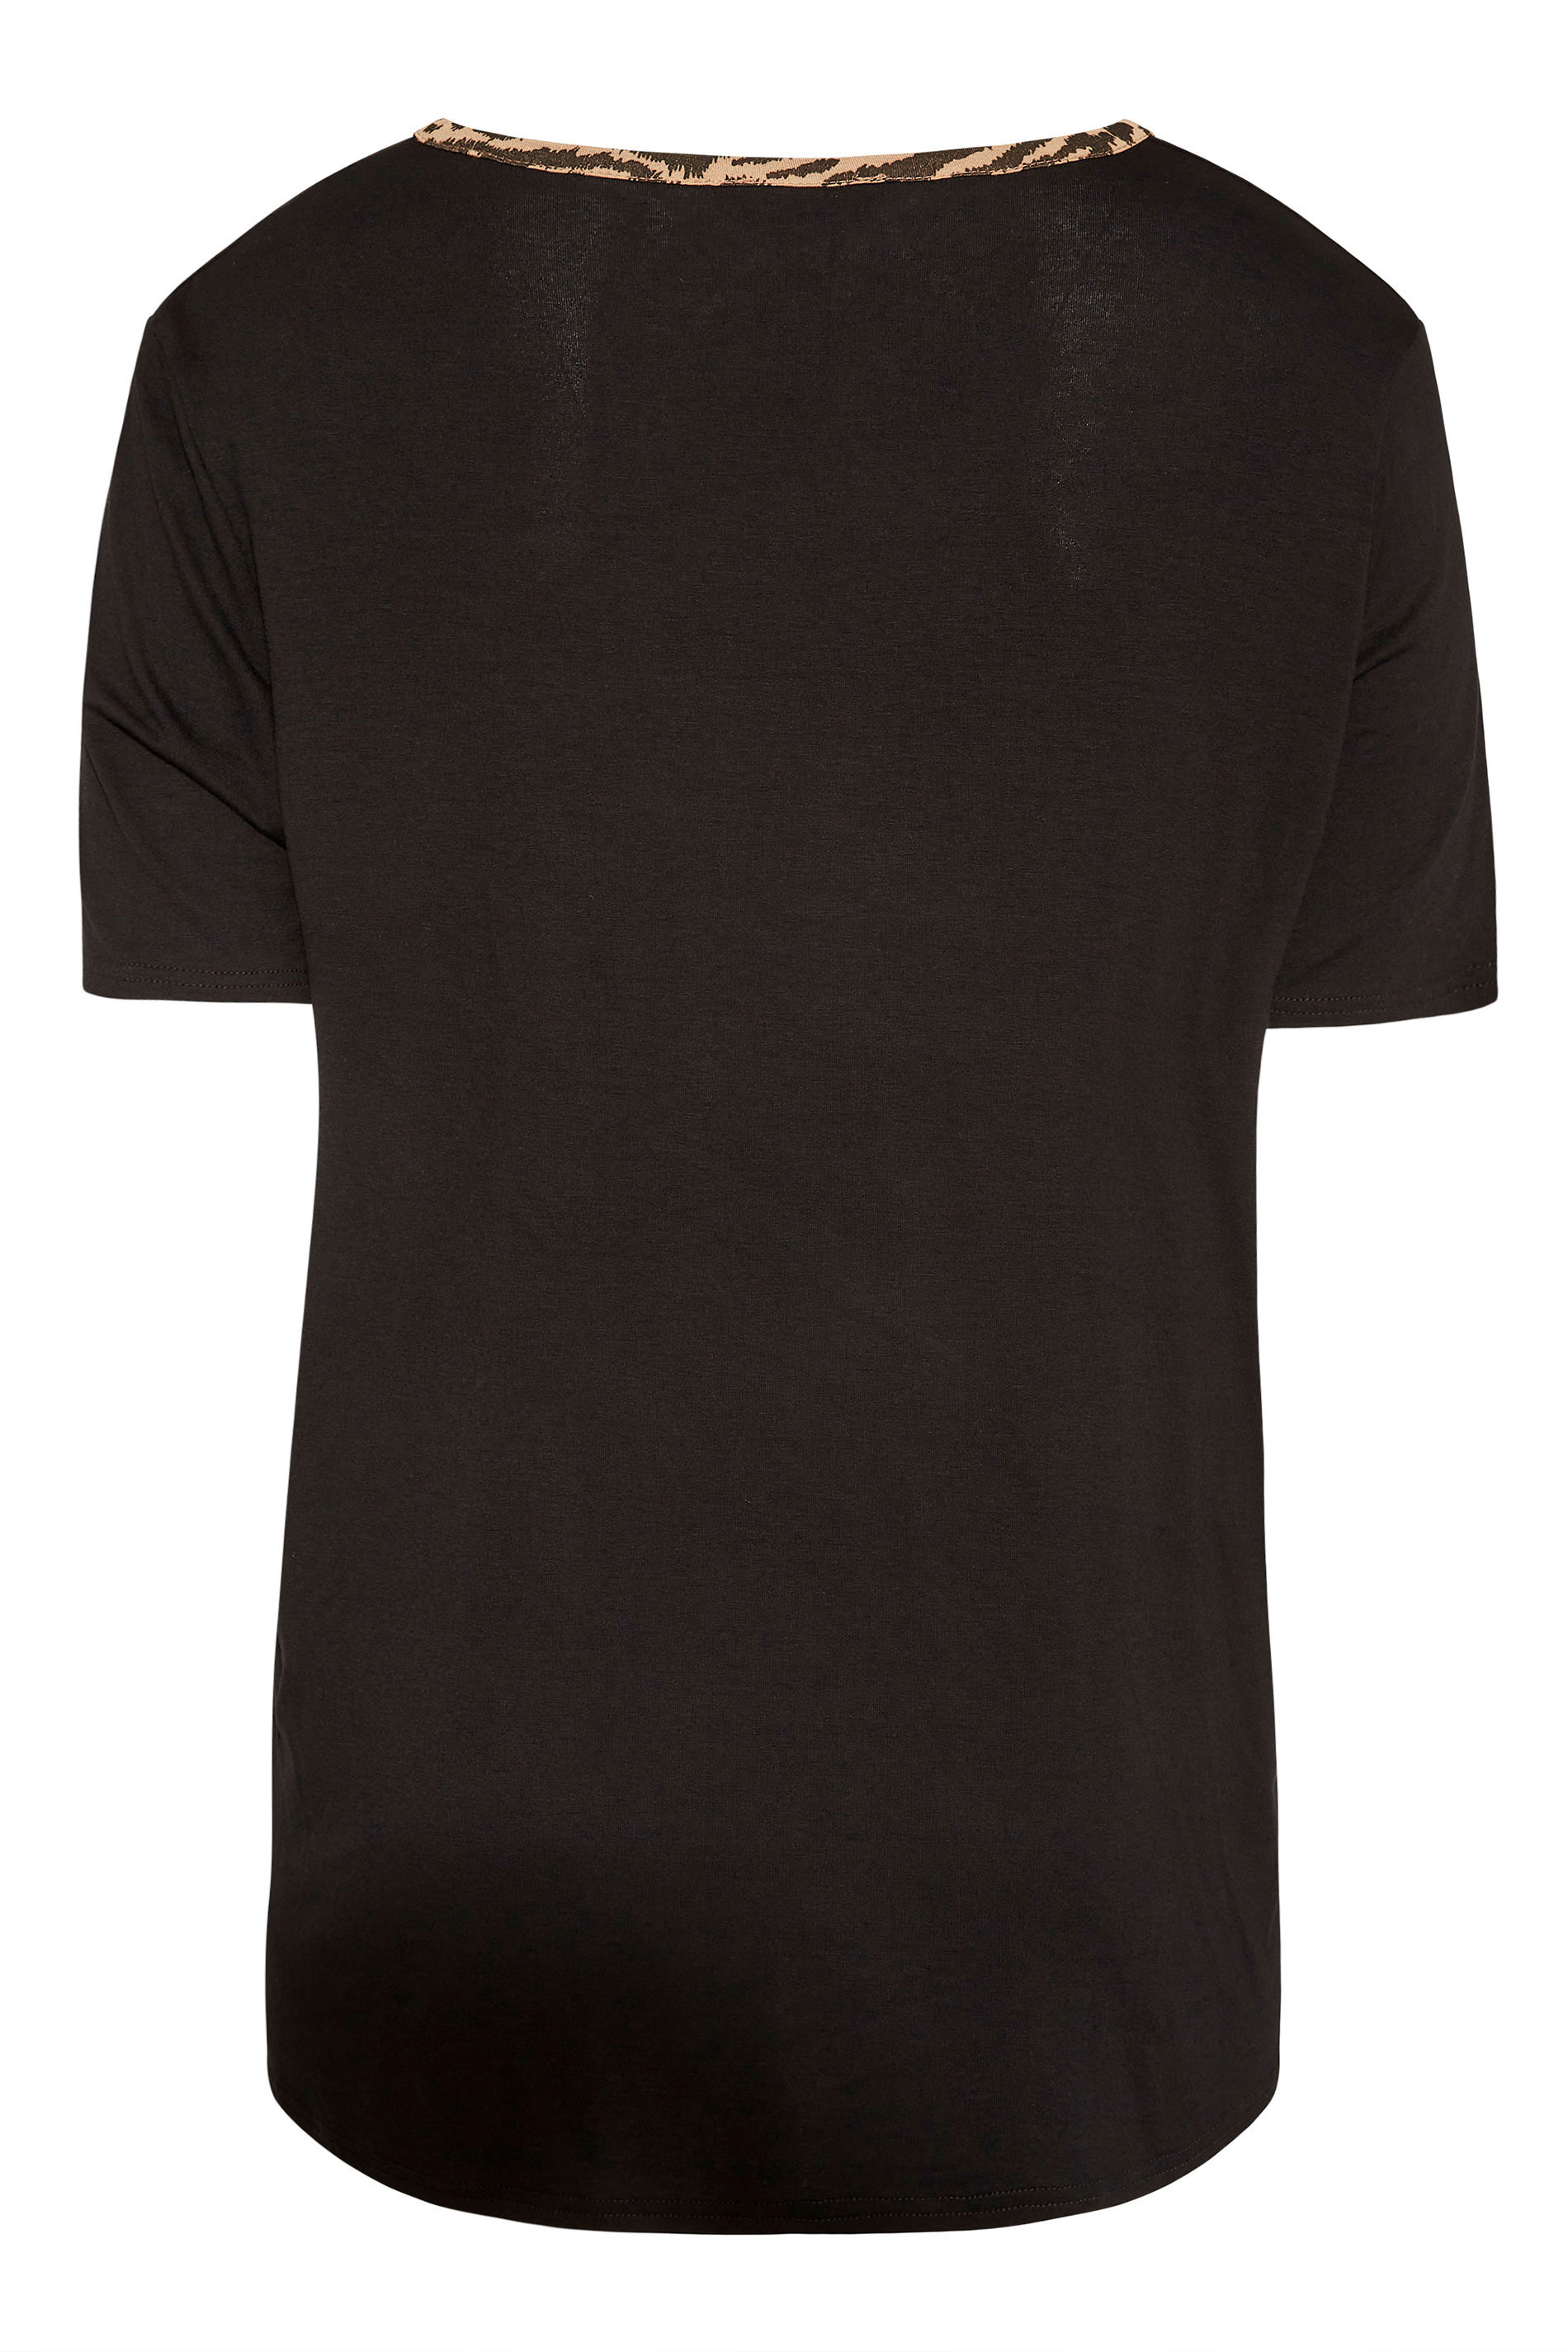 Grande taille  Tops Grande taille  Tops Jersey | LIMITED COLLECTION - T-Shirt Noir Block Léopard - NS16304